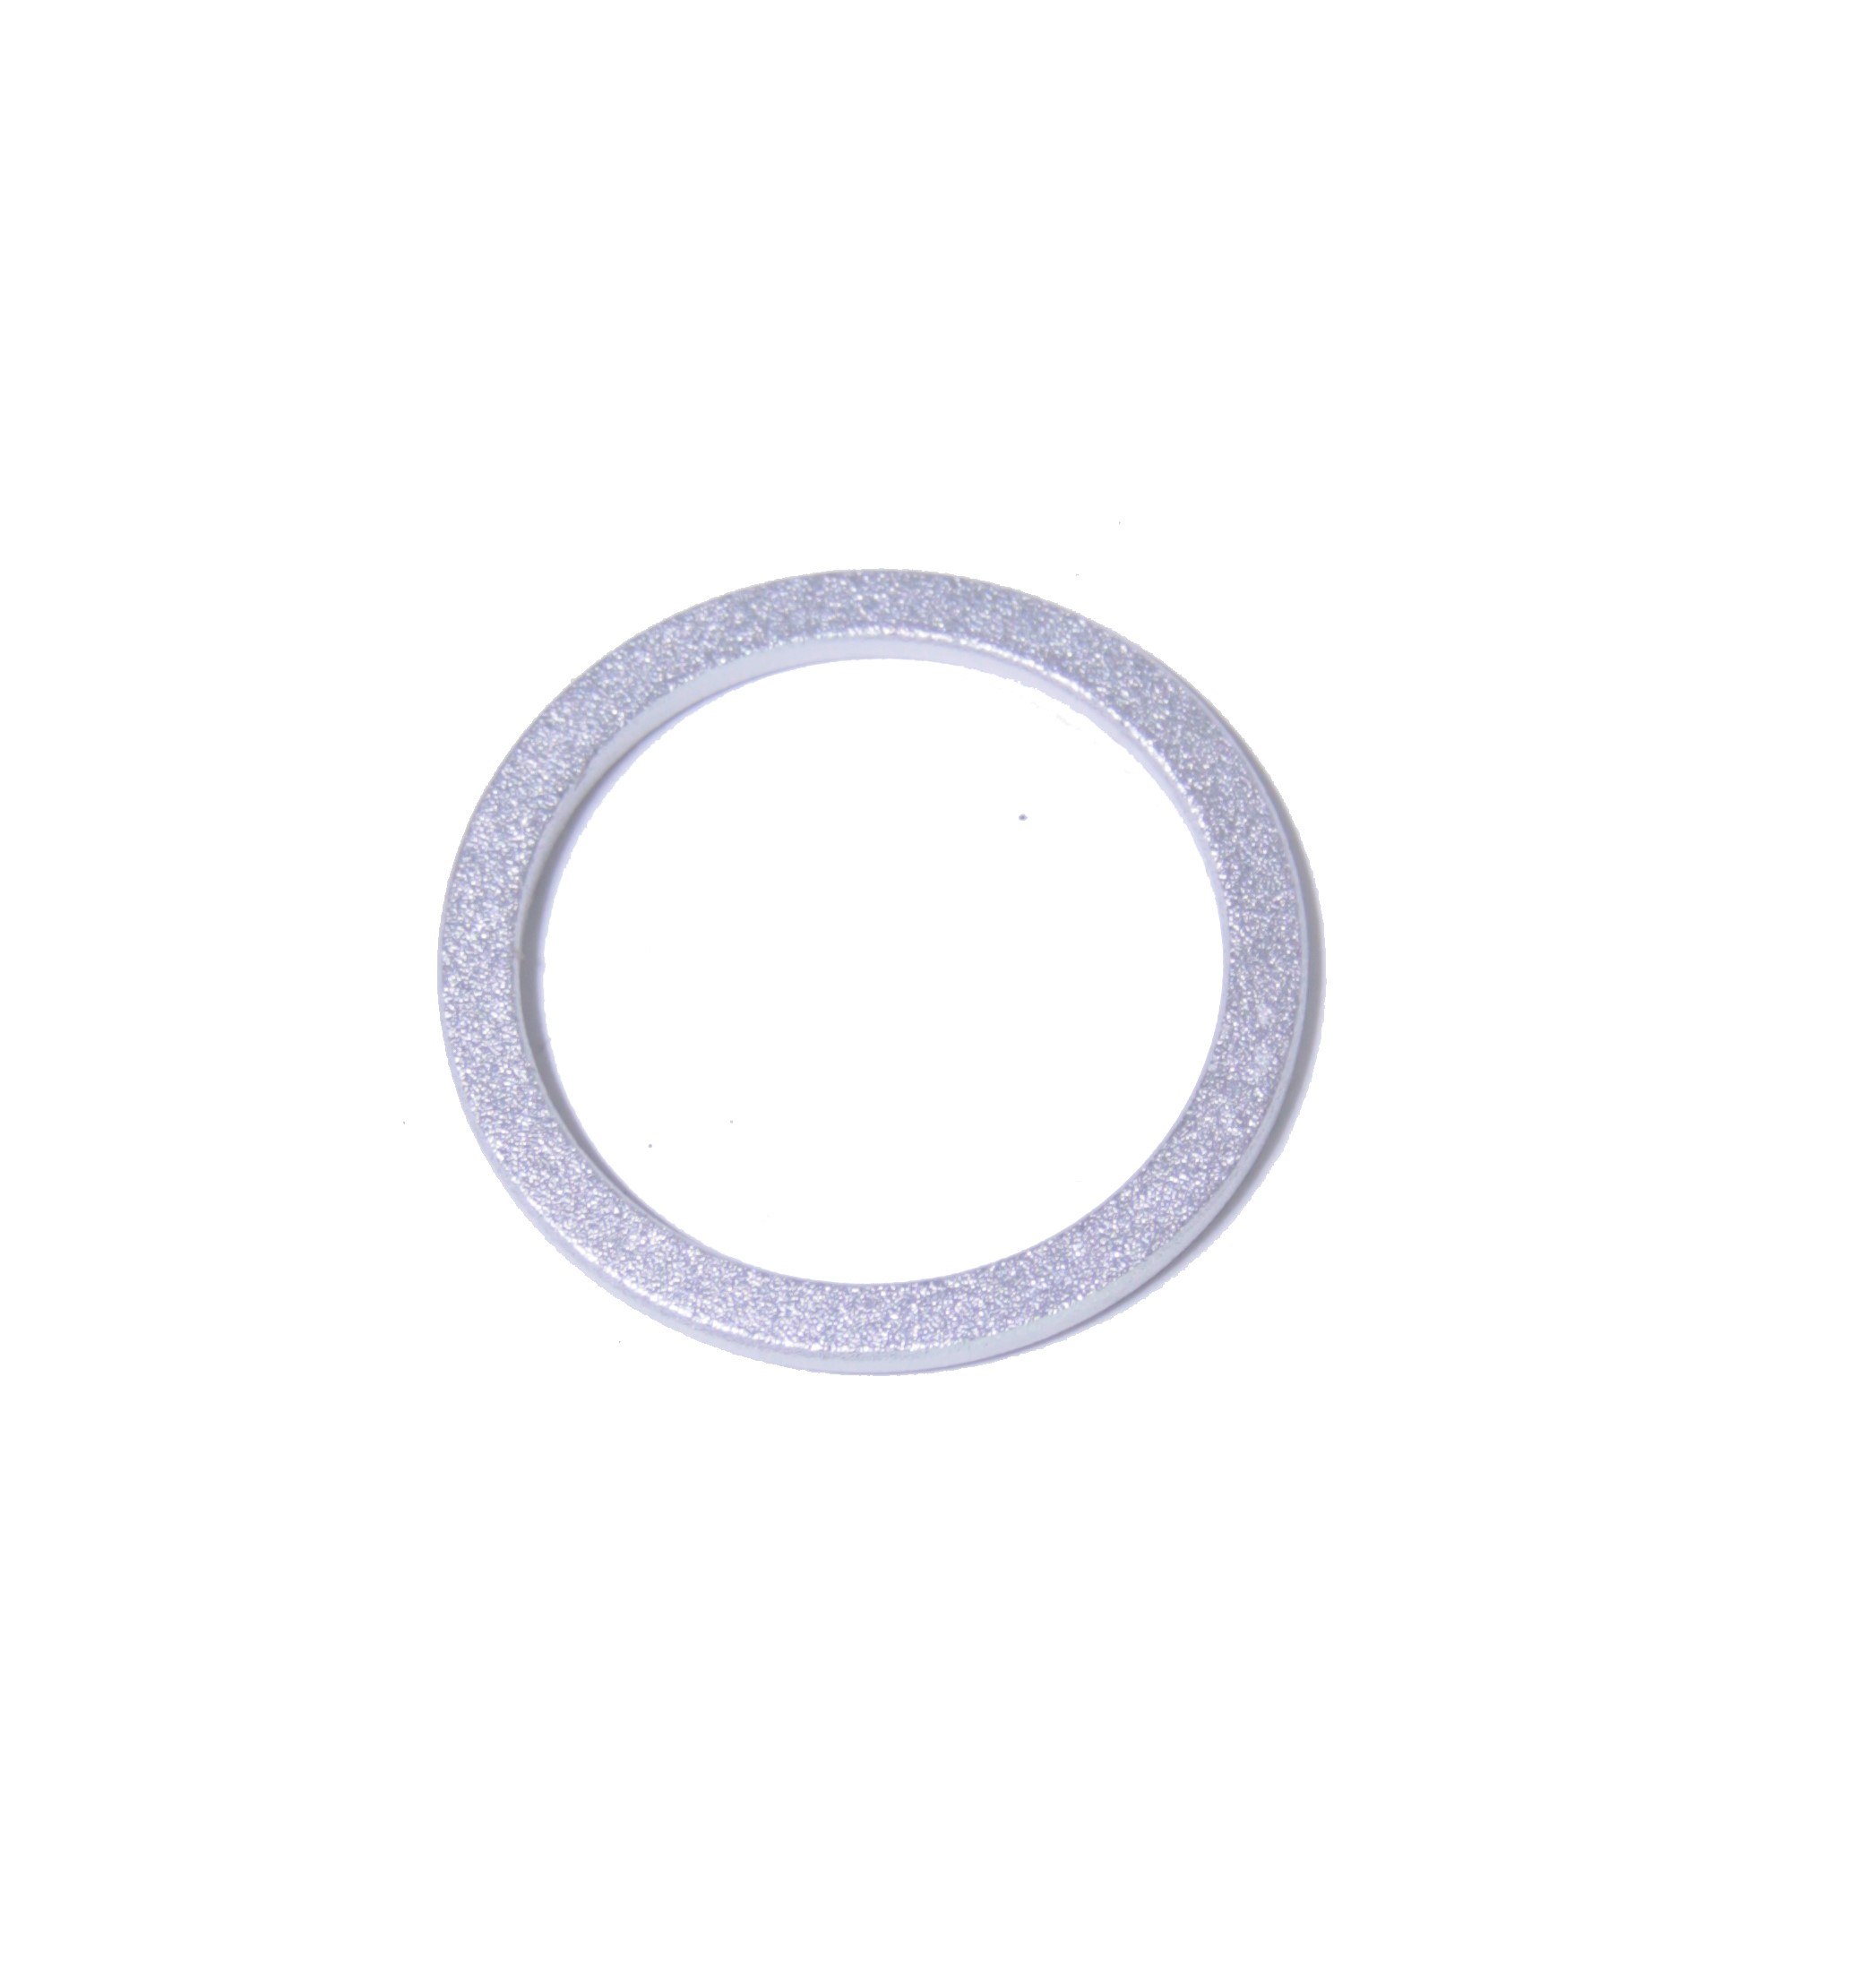 Spacer 2 mm 1 1/8 x 2 mm, alu silver